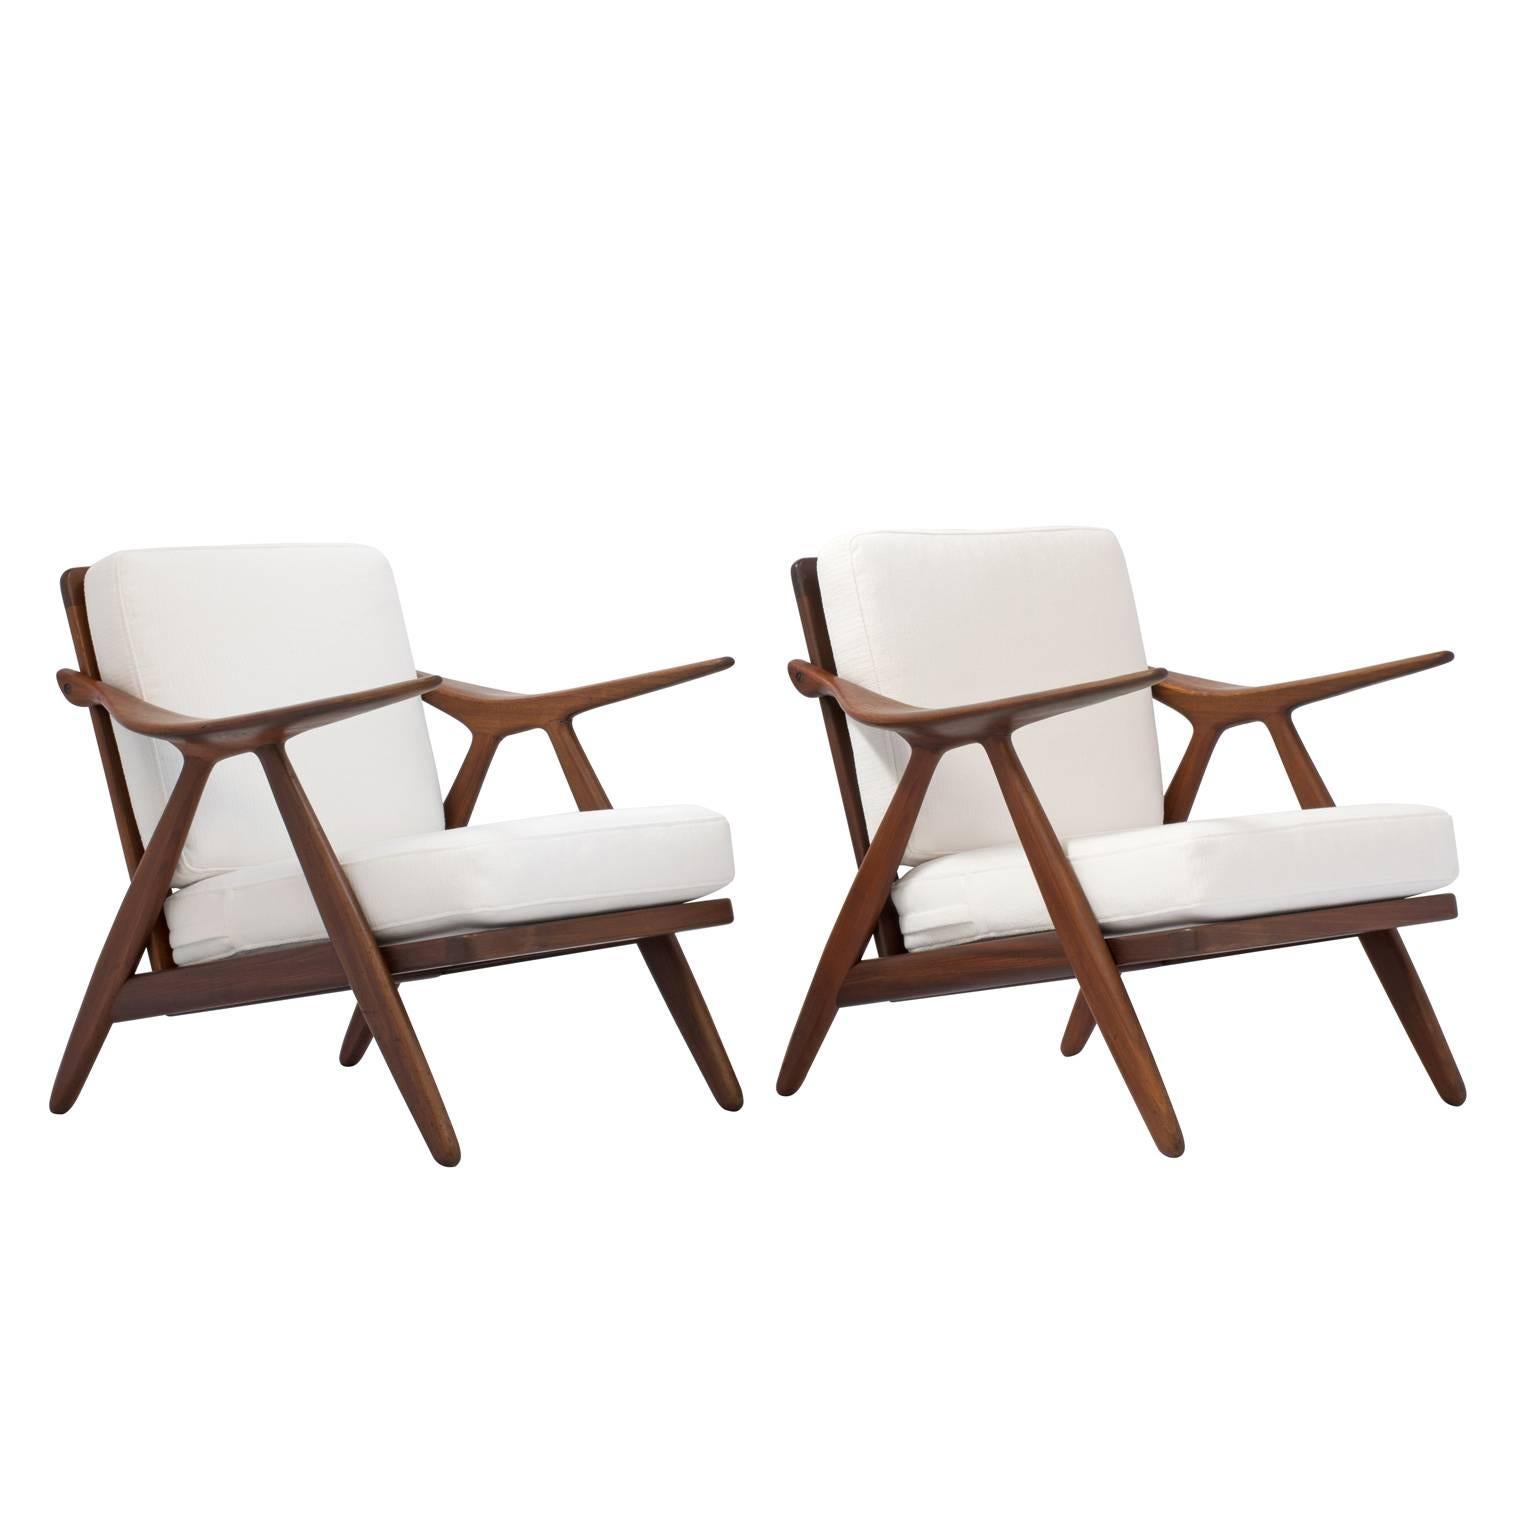 Pair of beautiful Mid-Century Danish lounge chairs by Arne Hovmand-Olsen, model 27, for Randers Mobelfabrik. The chairs feature fluidly formed arms and arrow slat backs. The frames are sturdy and strong in their original “as found” condition with